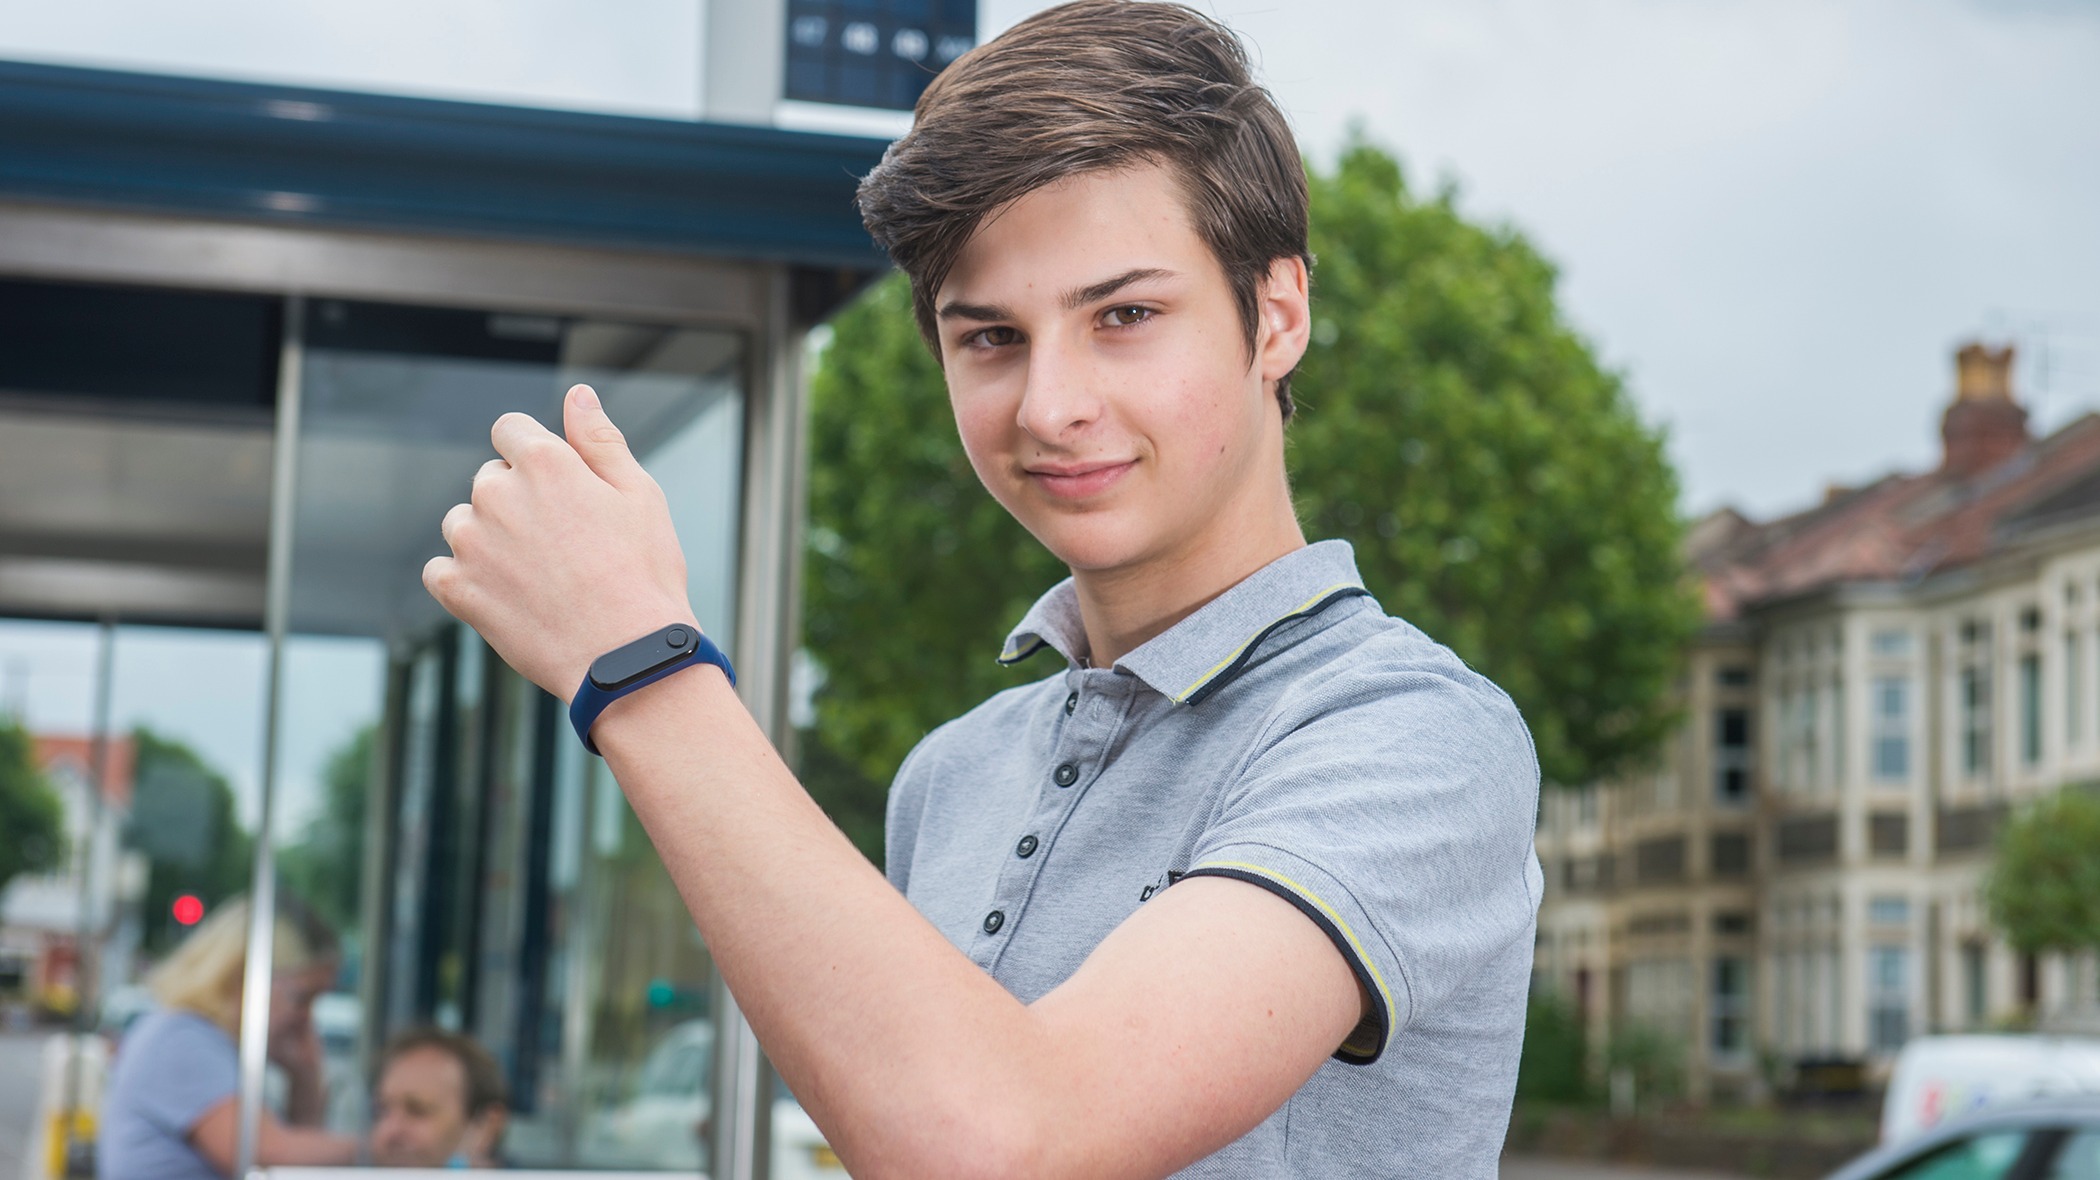 Bristol teenager invents wearable gadget to reduce Covid-19 transmissions | ITV News - ITV News